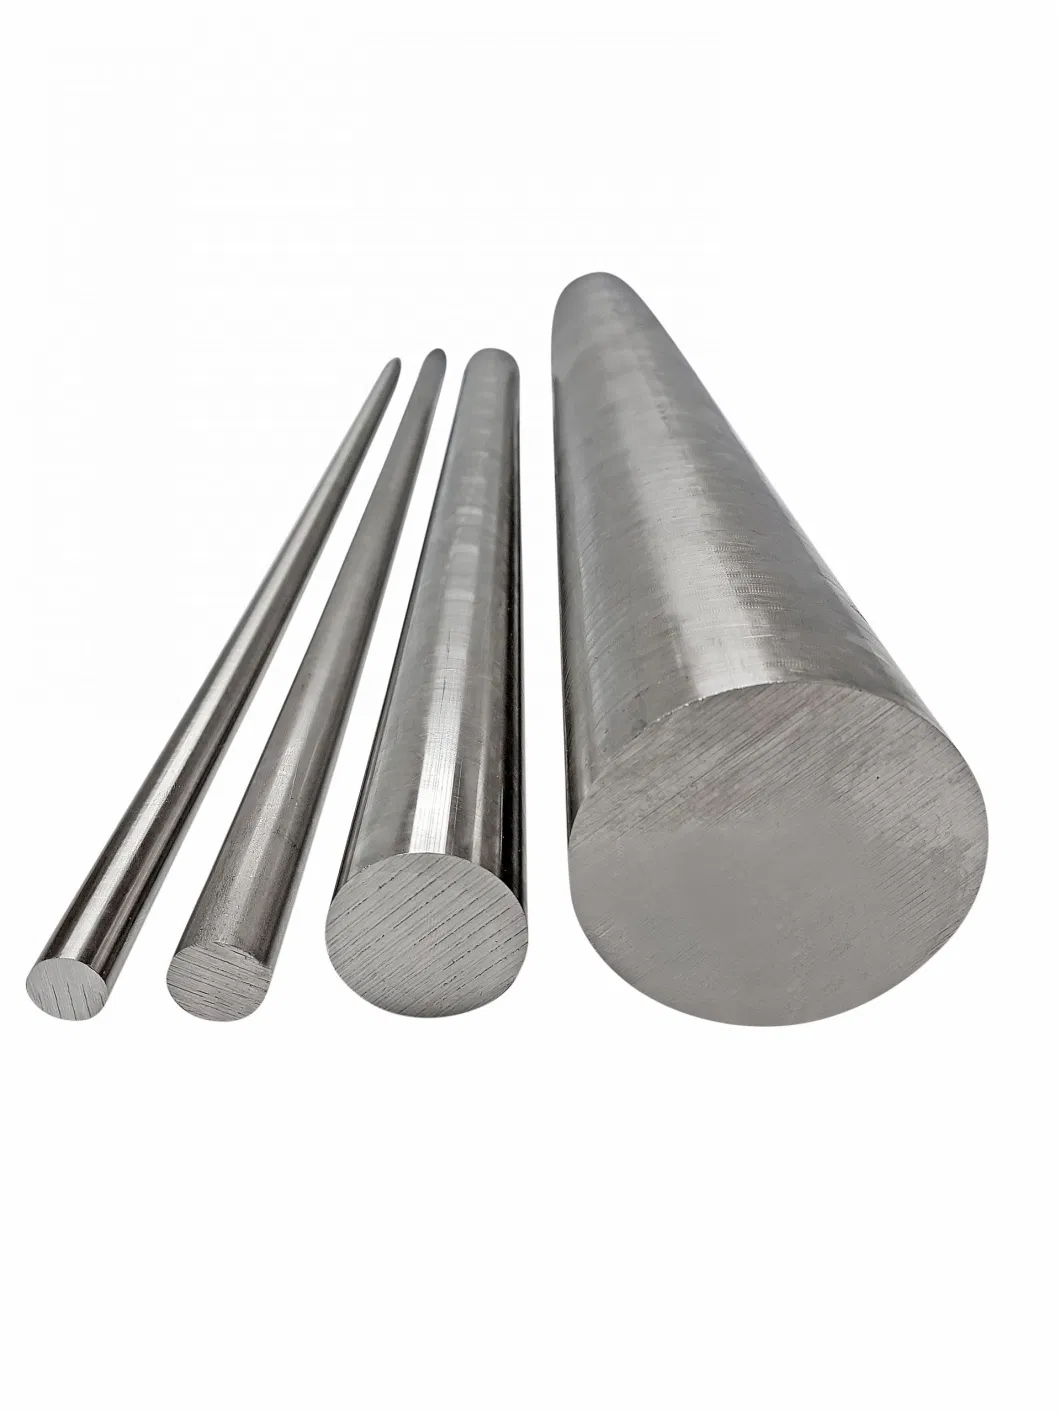 Wholesale High Quality 201 202 304 316 Round Bar Stainless Steel Rod